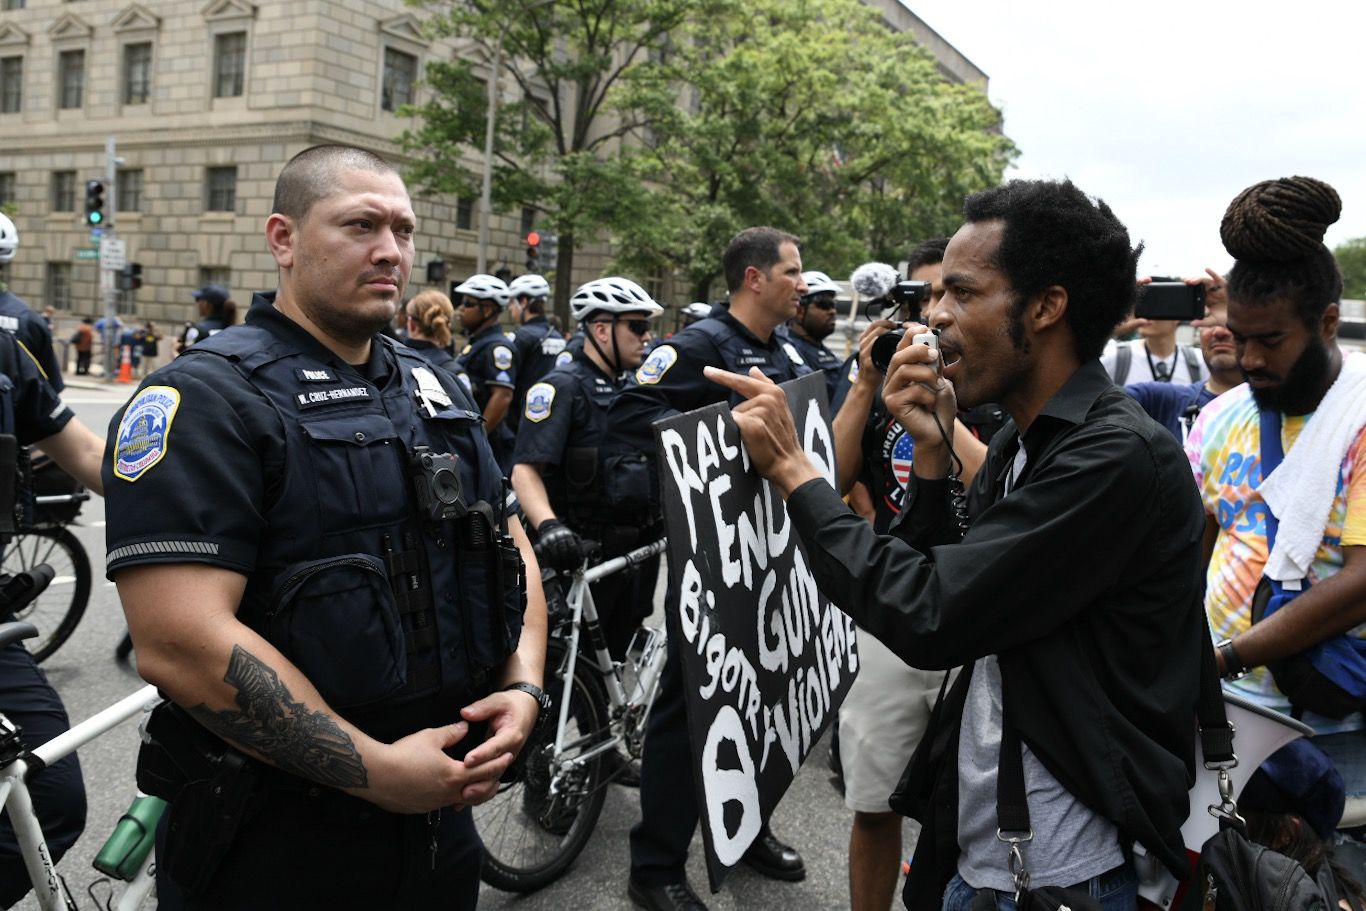 A protester confronts a Washington, D.C. police officer, accusing them of protecting white supremacists, while opposing a far-right rally on July 6, 2019. Trump supporters and anti-fascist organizers held dueling rallies across the street from each other, leading to high tensions as D.C. and U.S. Park Police largely held the peace. (WTOP/Alejandro Alvarez)